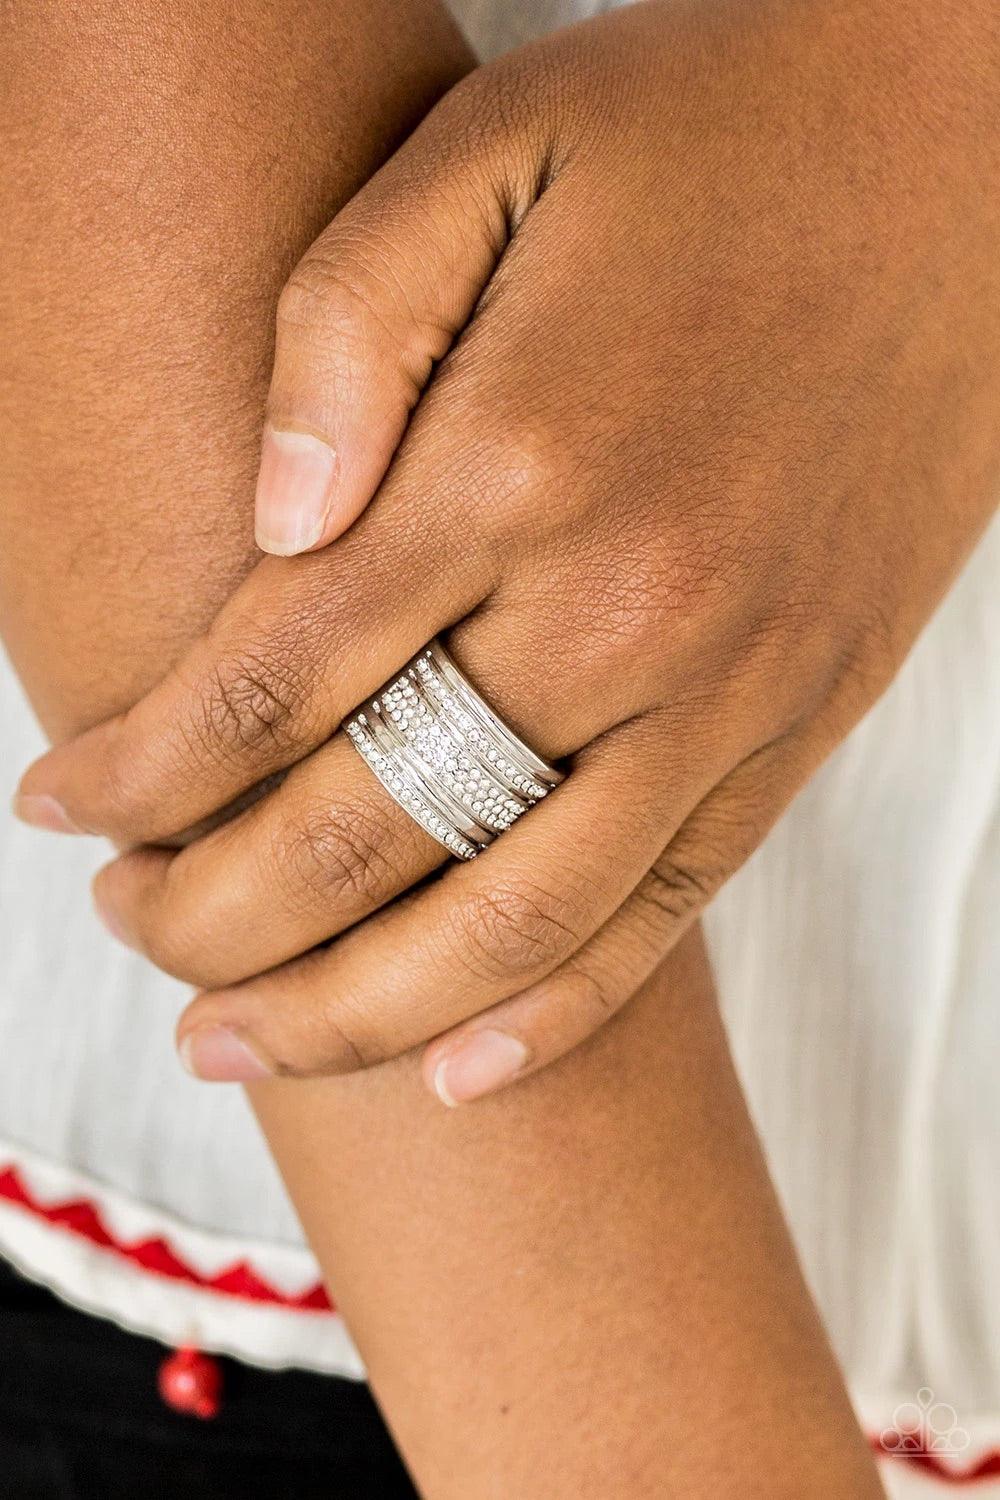 Paparazzi Accessories Top Dollar Drama - White Shimmery silver and white rhinestone encrusted bands stack across the finger for a glamorous look. Features a stretchy band for a flexible fit. Sold as one individual ring. Jewelry